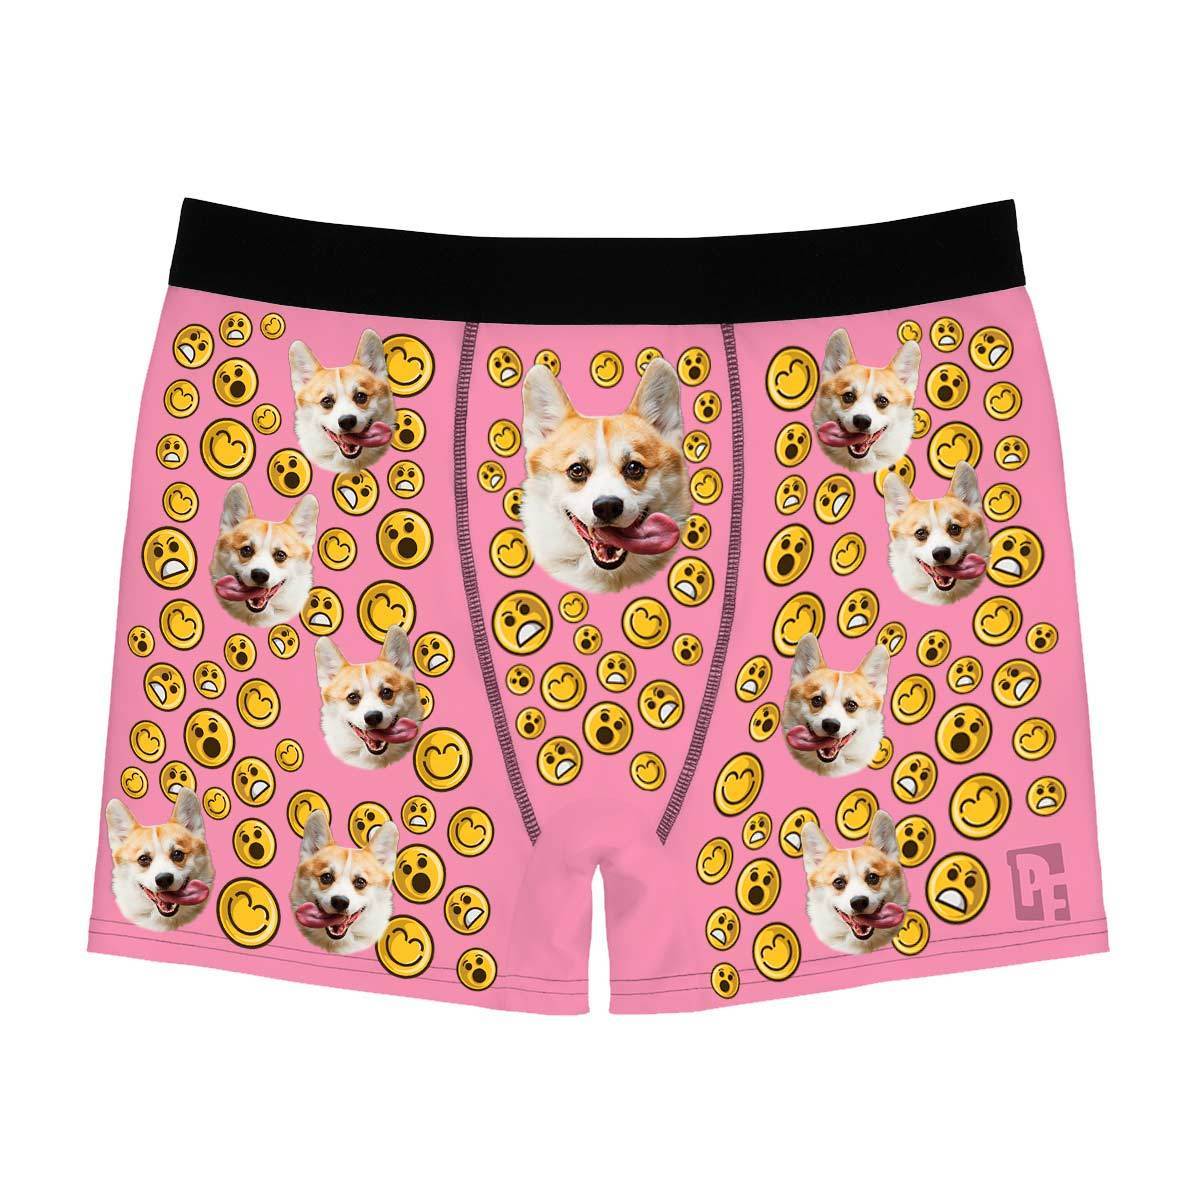 Pink Smiles men's boxer briefs personalized with photo printed on them